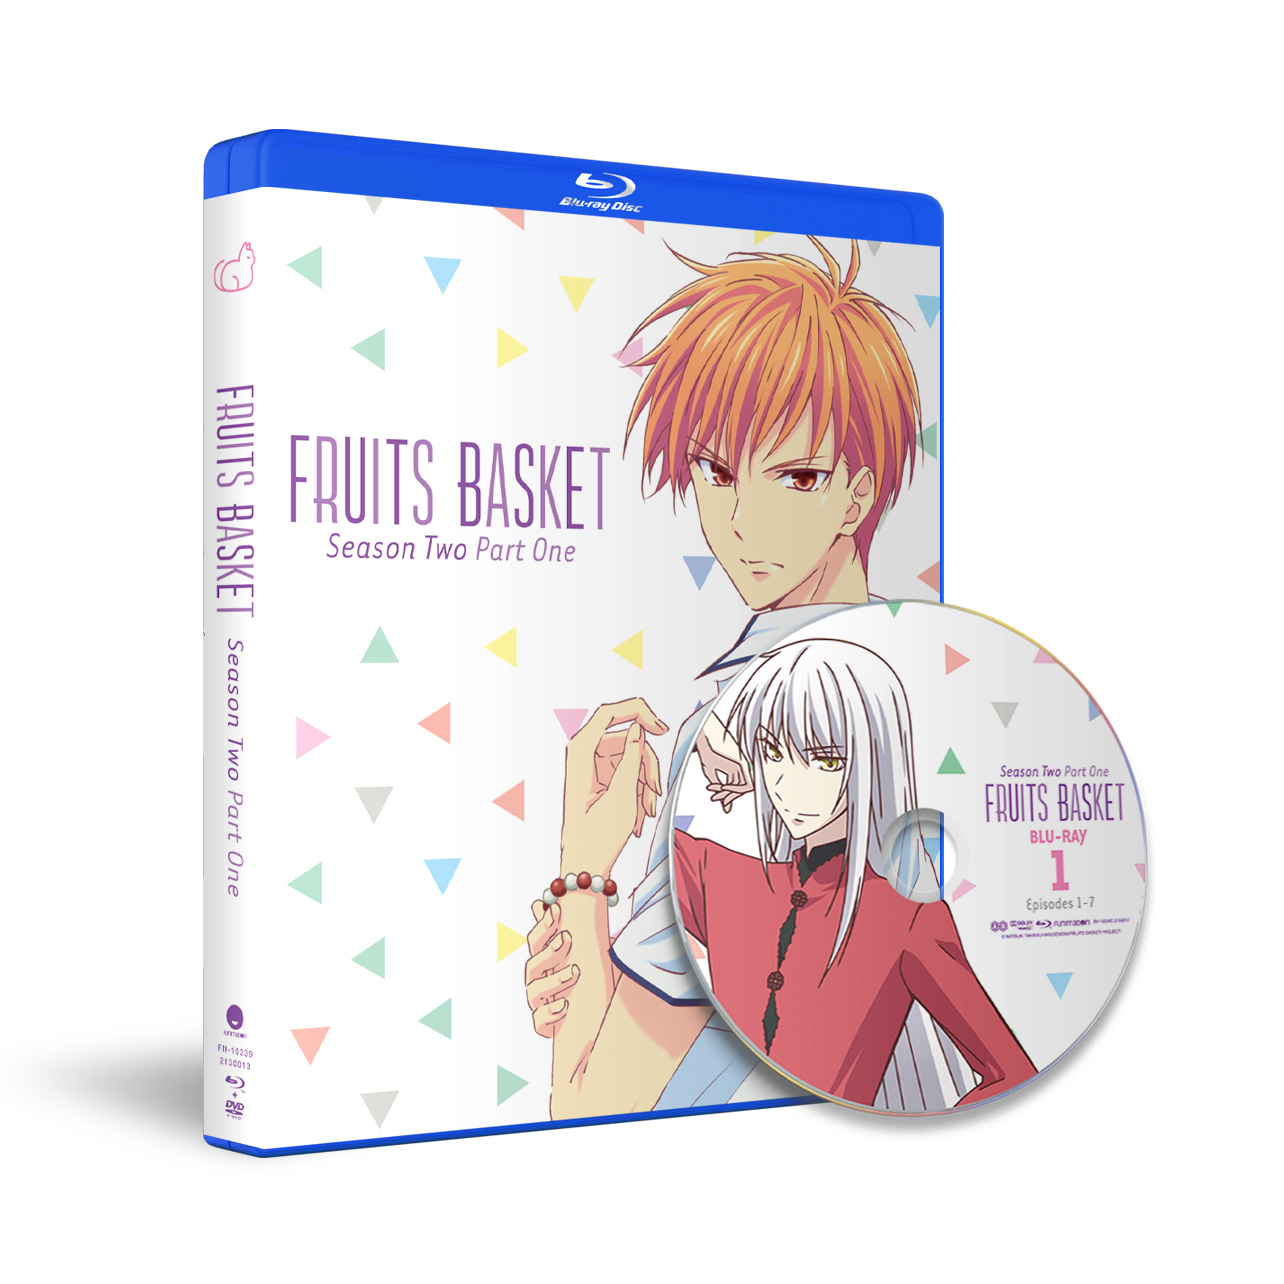 Fruits Basket (2019) - Season 2 Part 1 - Limited Edition - Blu-ray + DVD image count 6